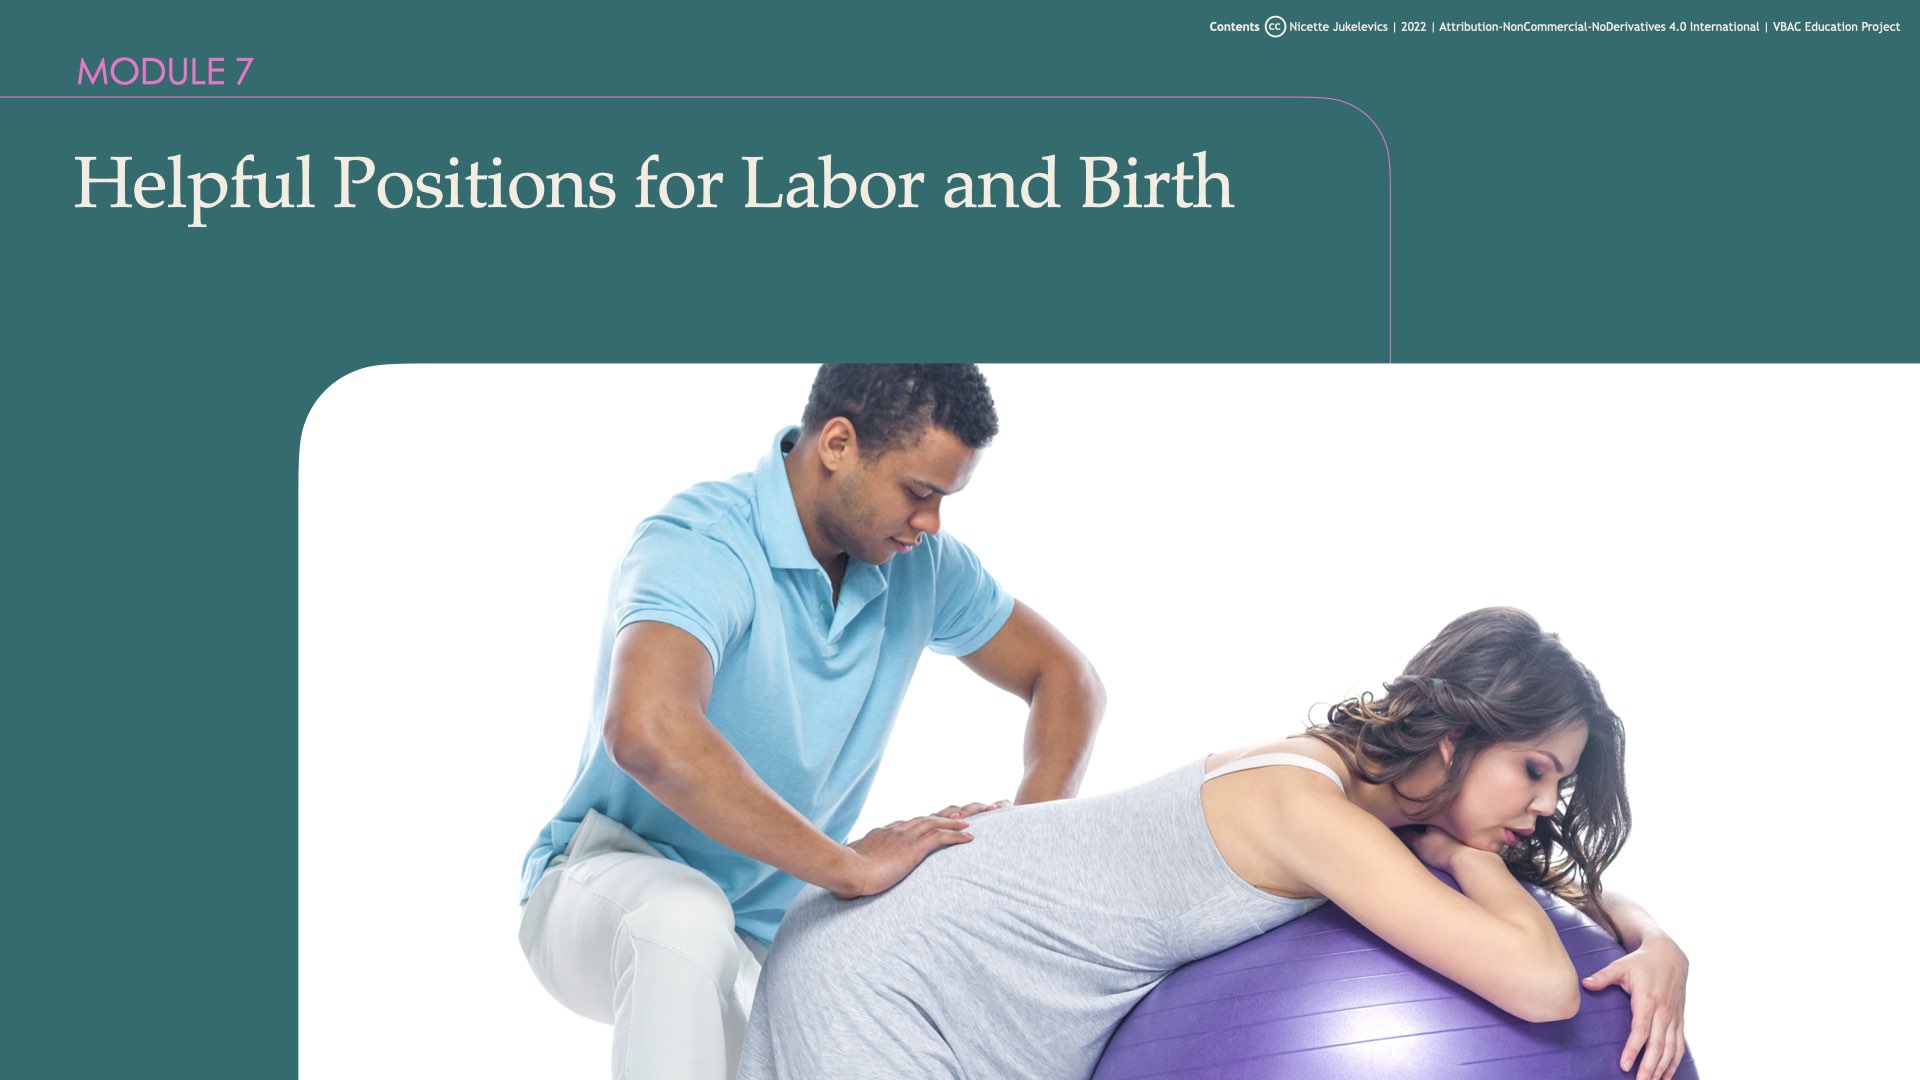 Module 7: Helpful Positions for Labor and Birth